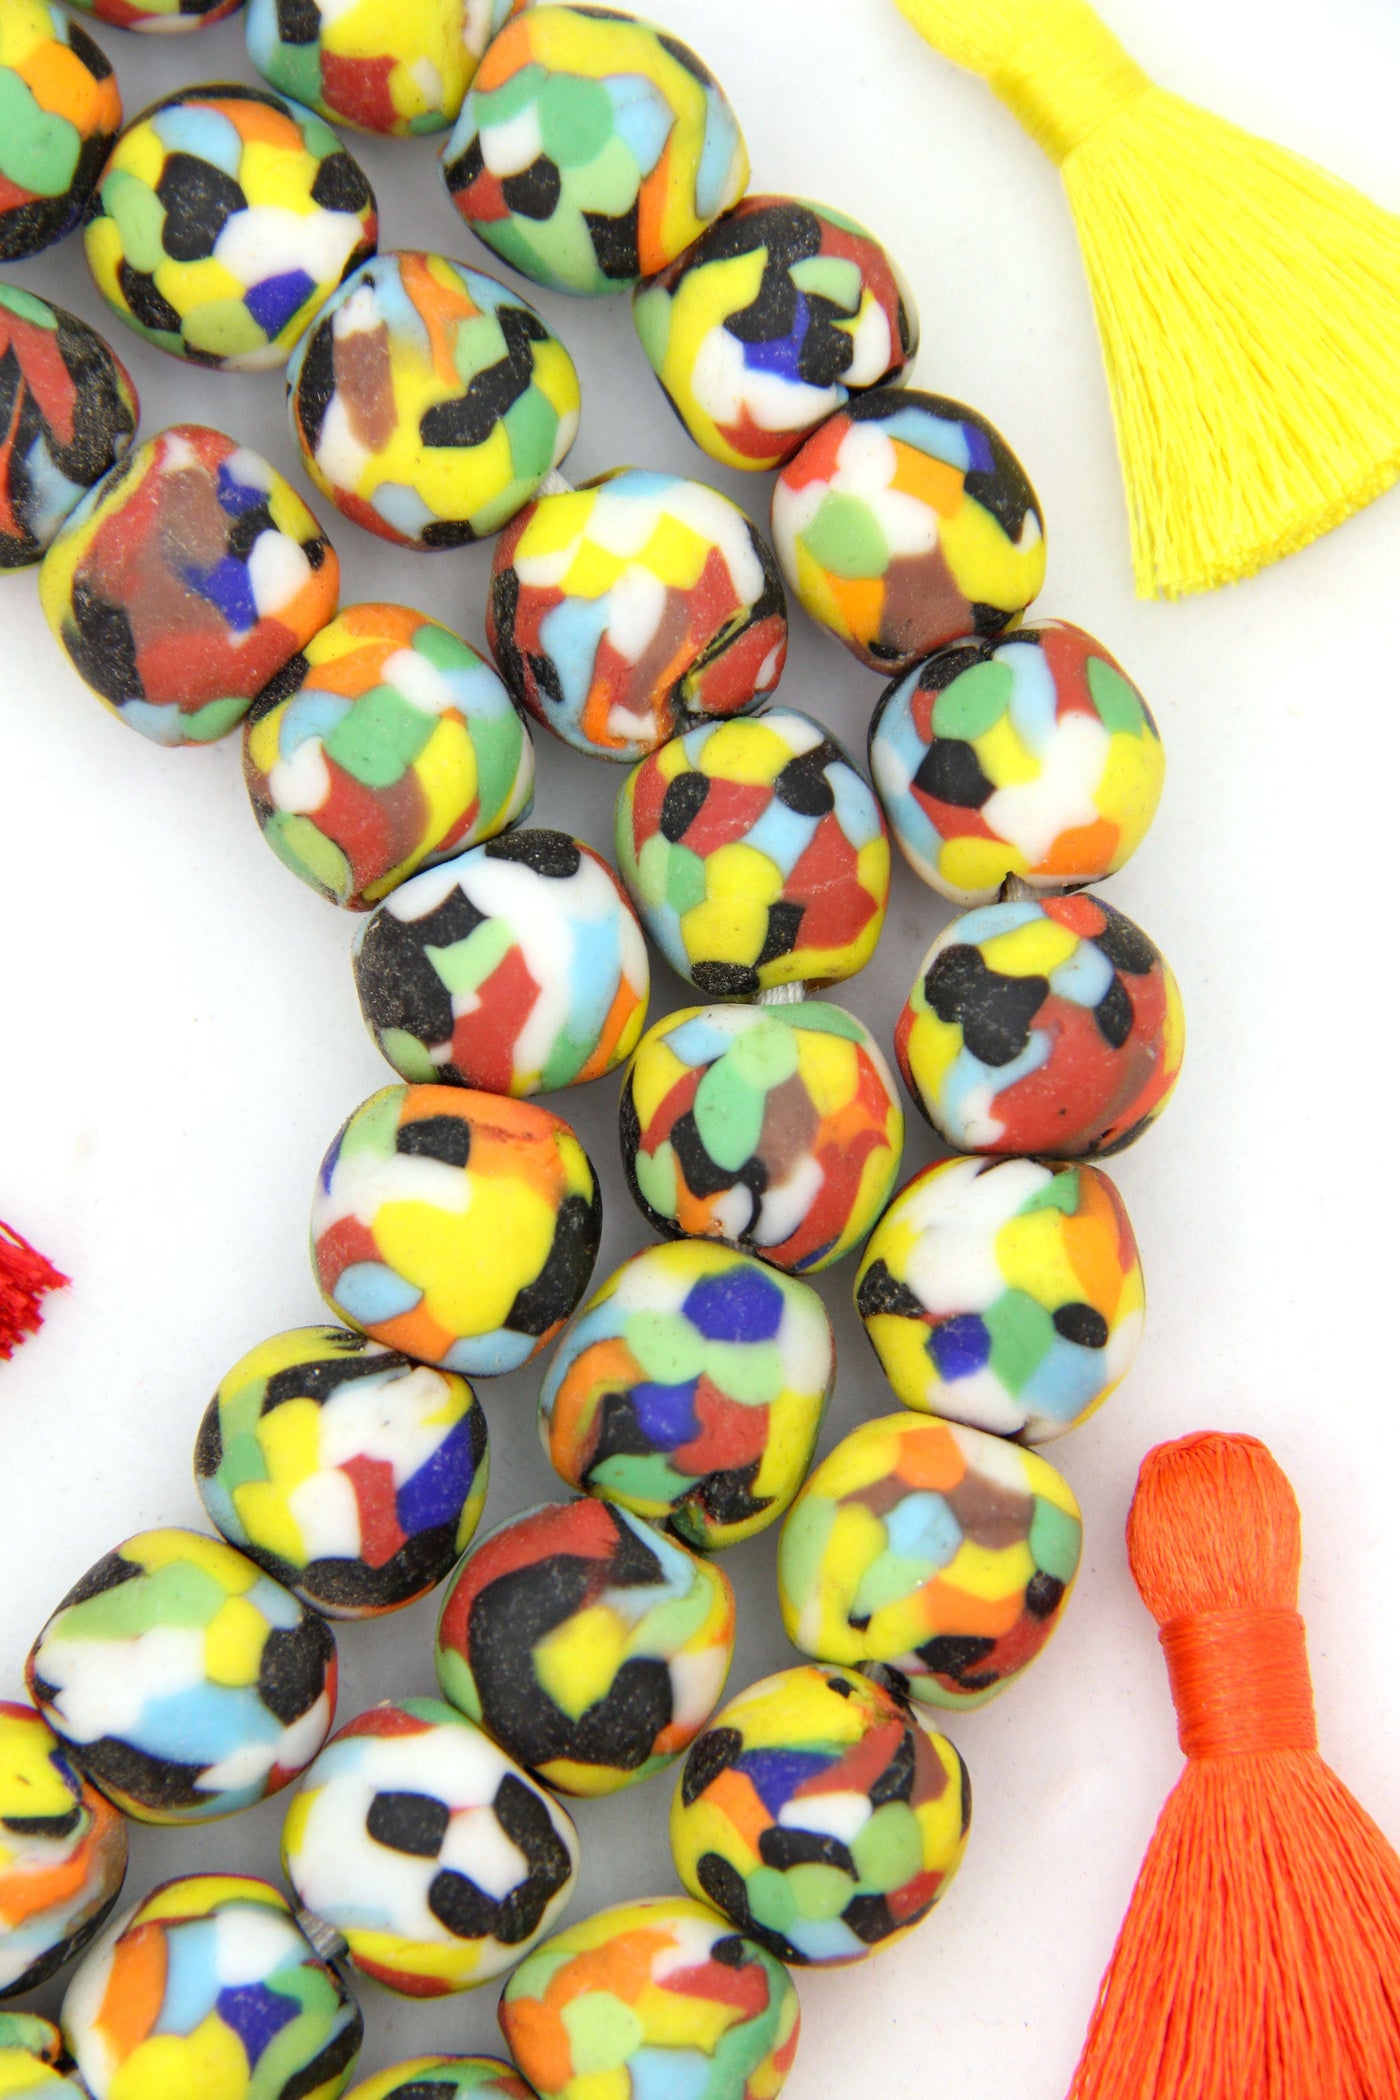 14mm Round Beads, Multicolor Confetti, Recycled Ghana Glass, 45 Beads